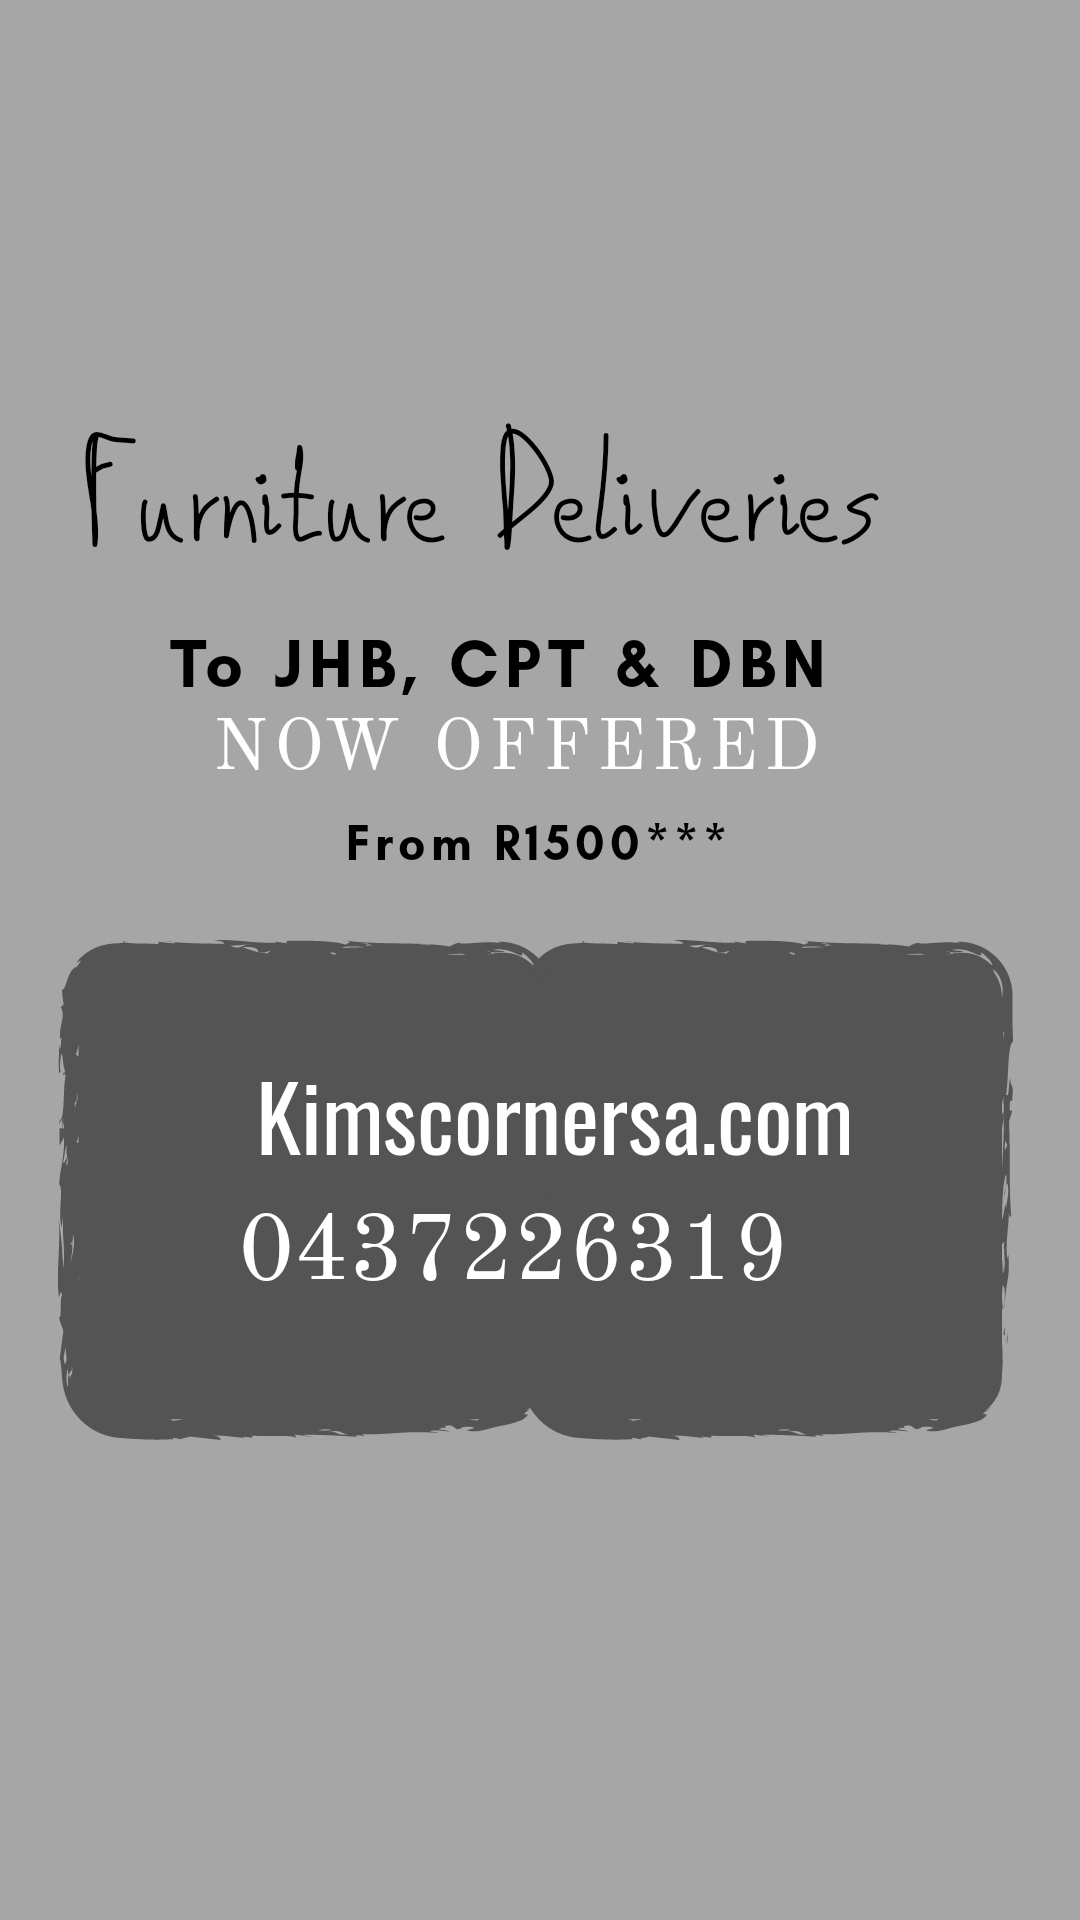 Furniture Deliveries available to JHB, CPT and DBN